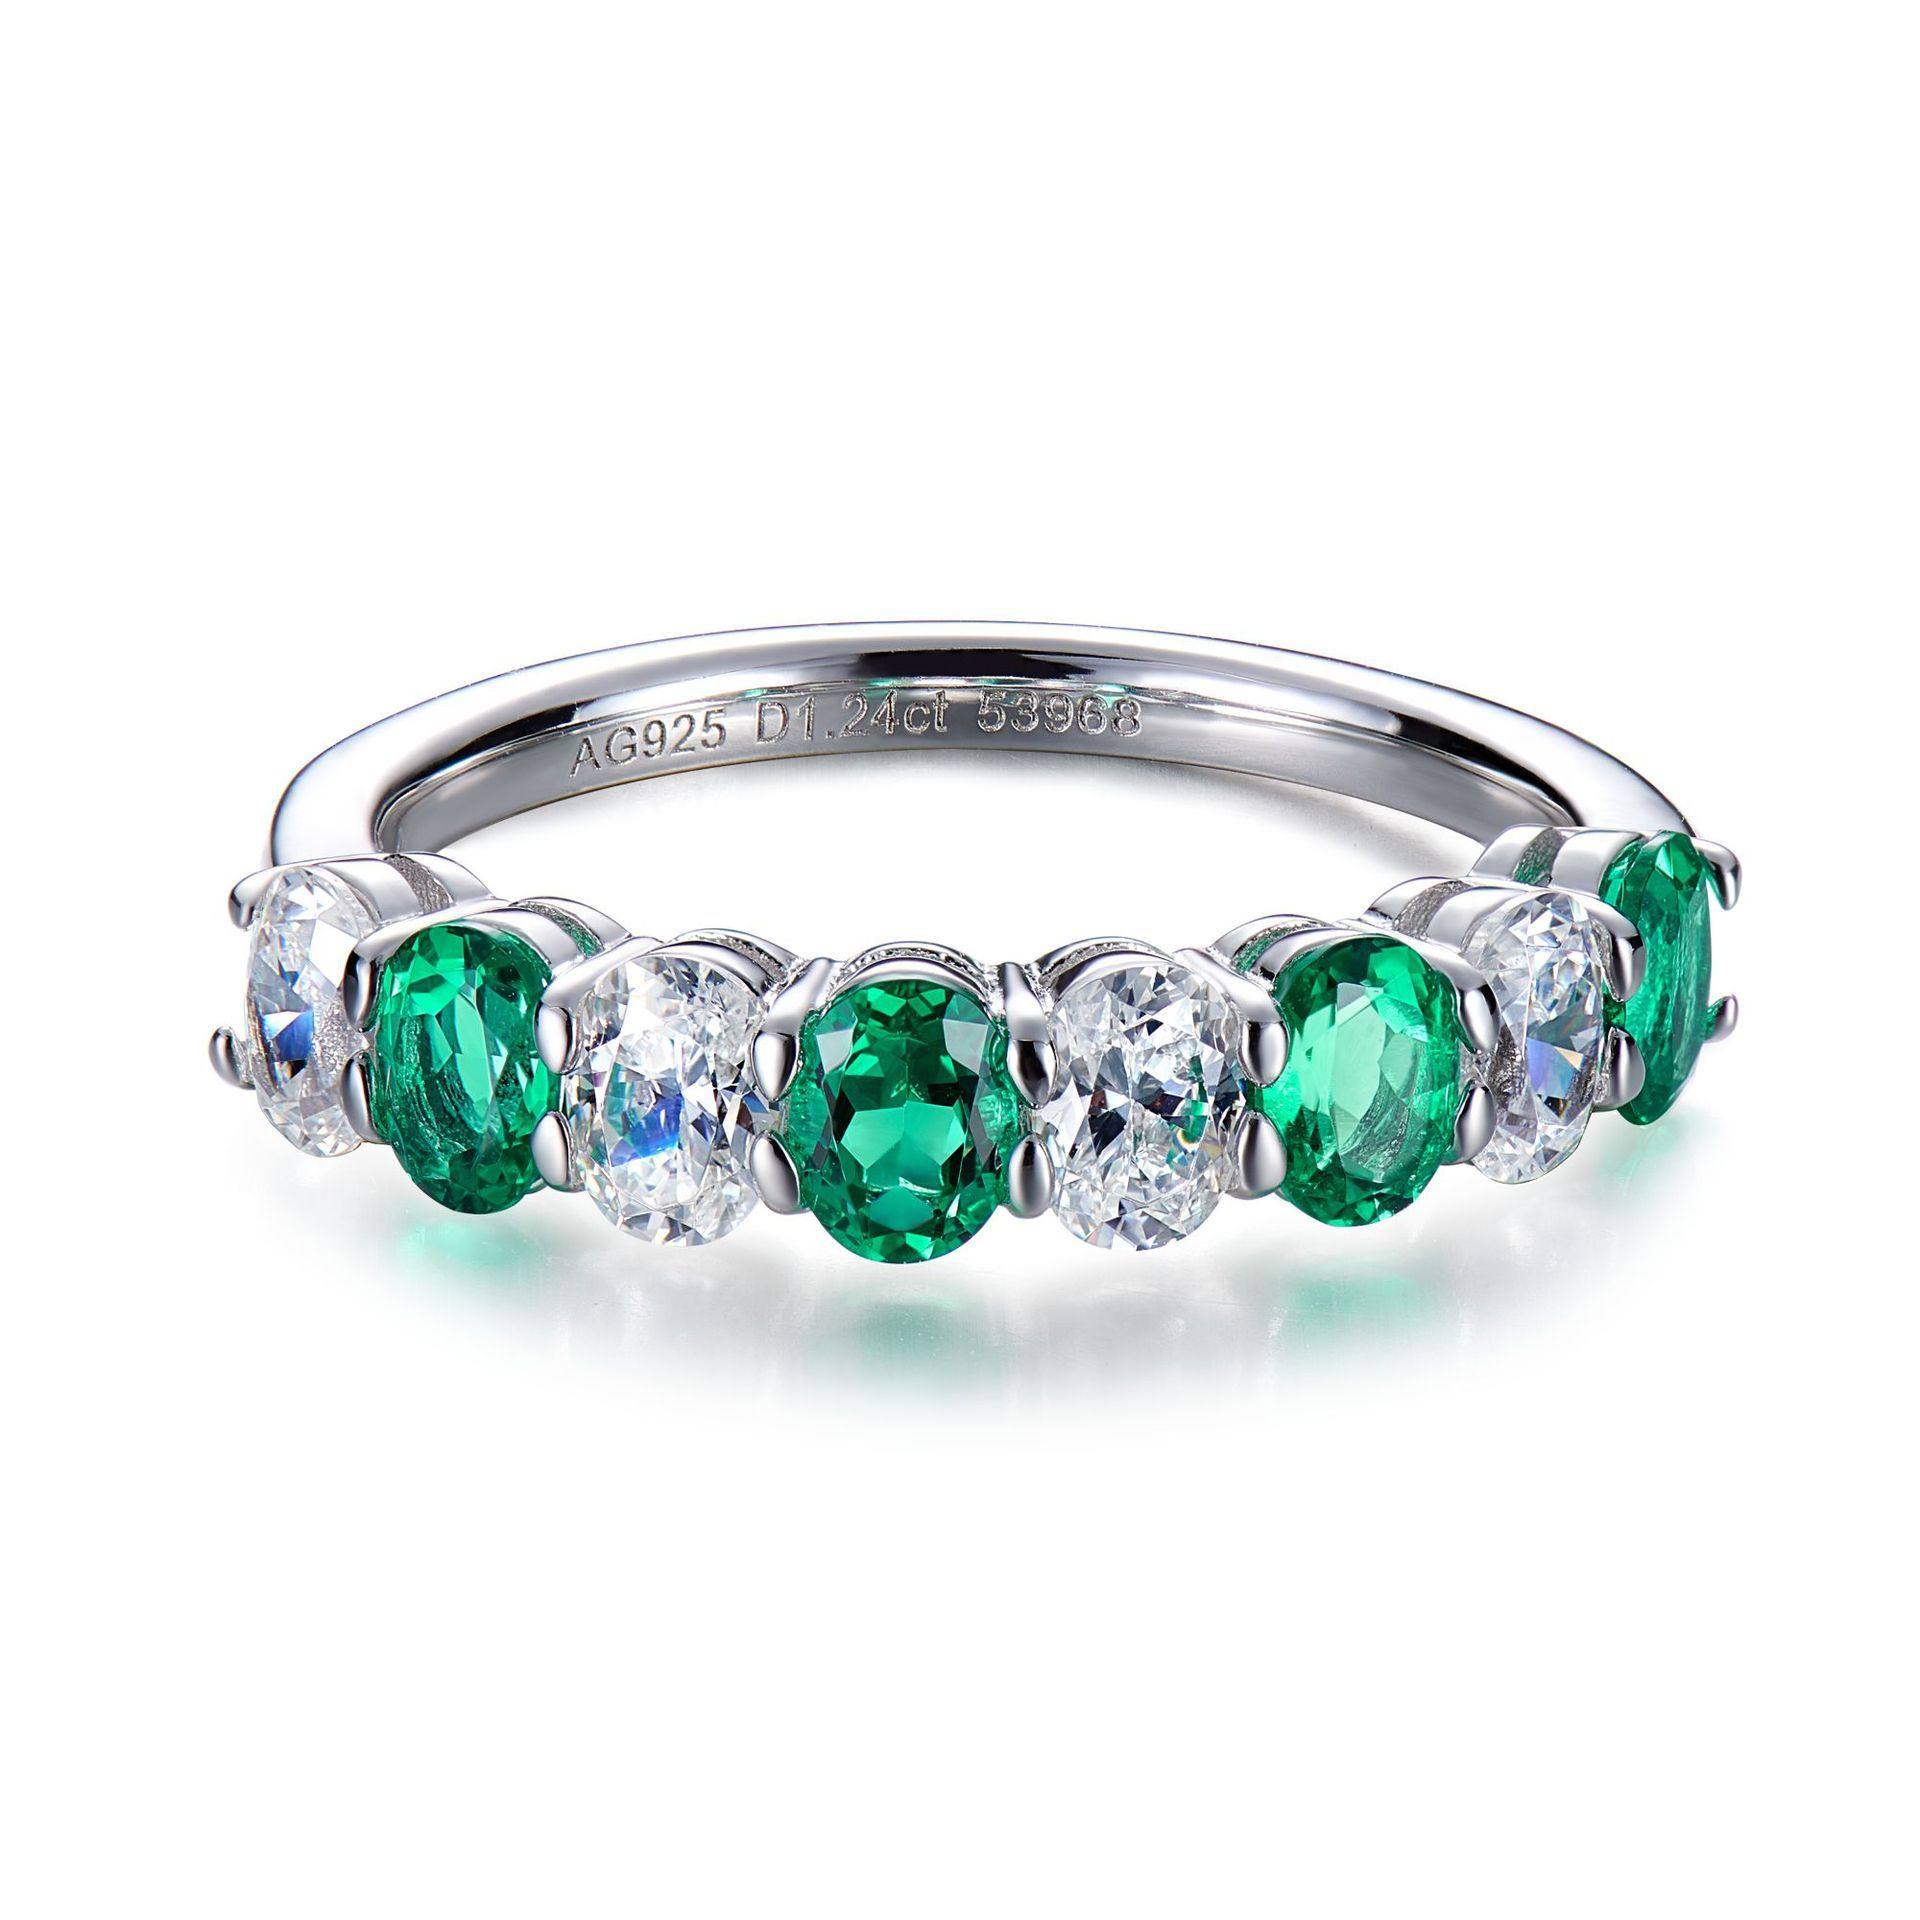 Half Eternity Ring with Emerald and Diamond - HERS